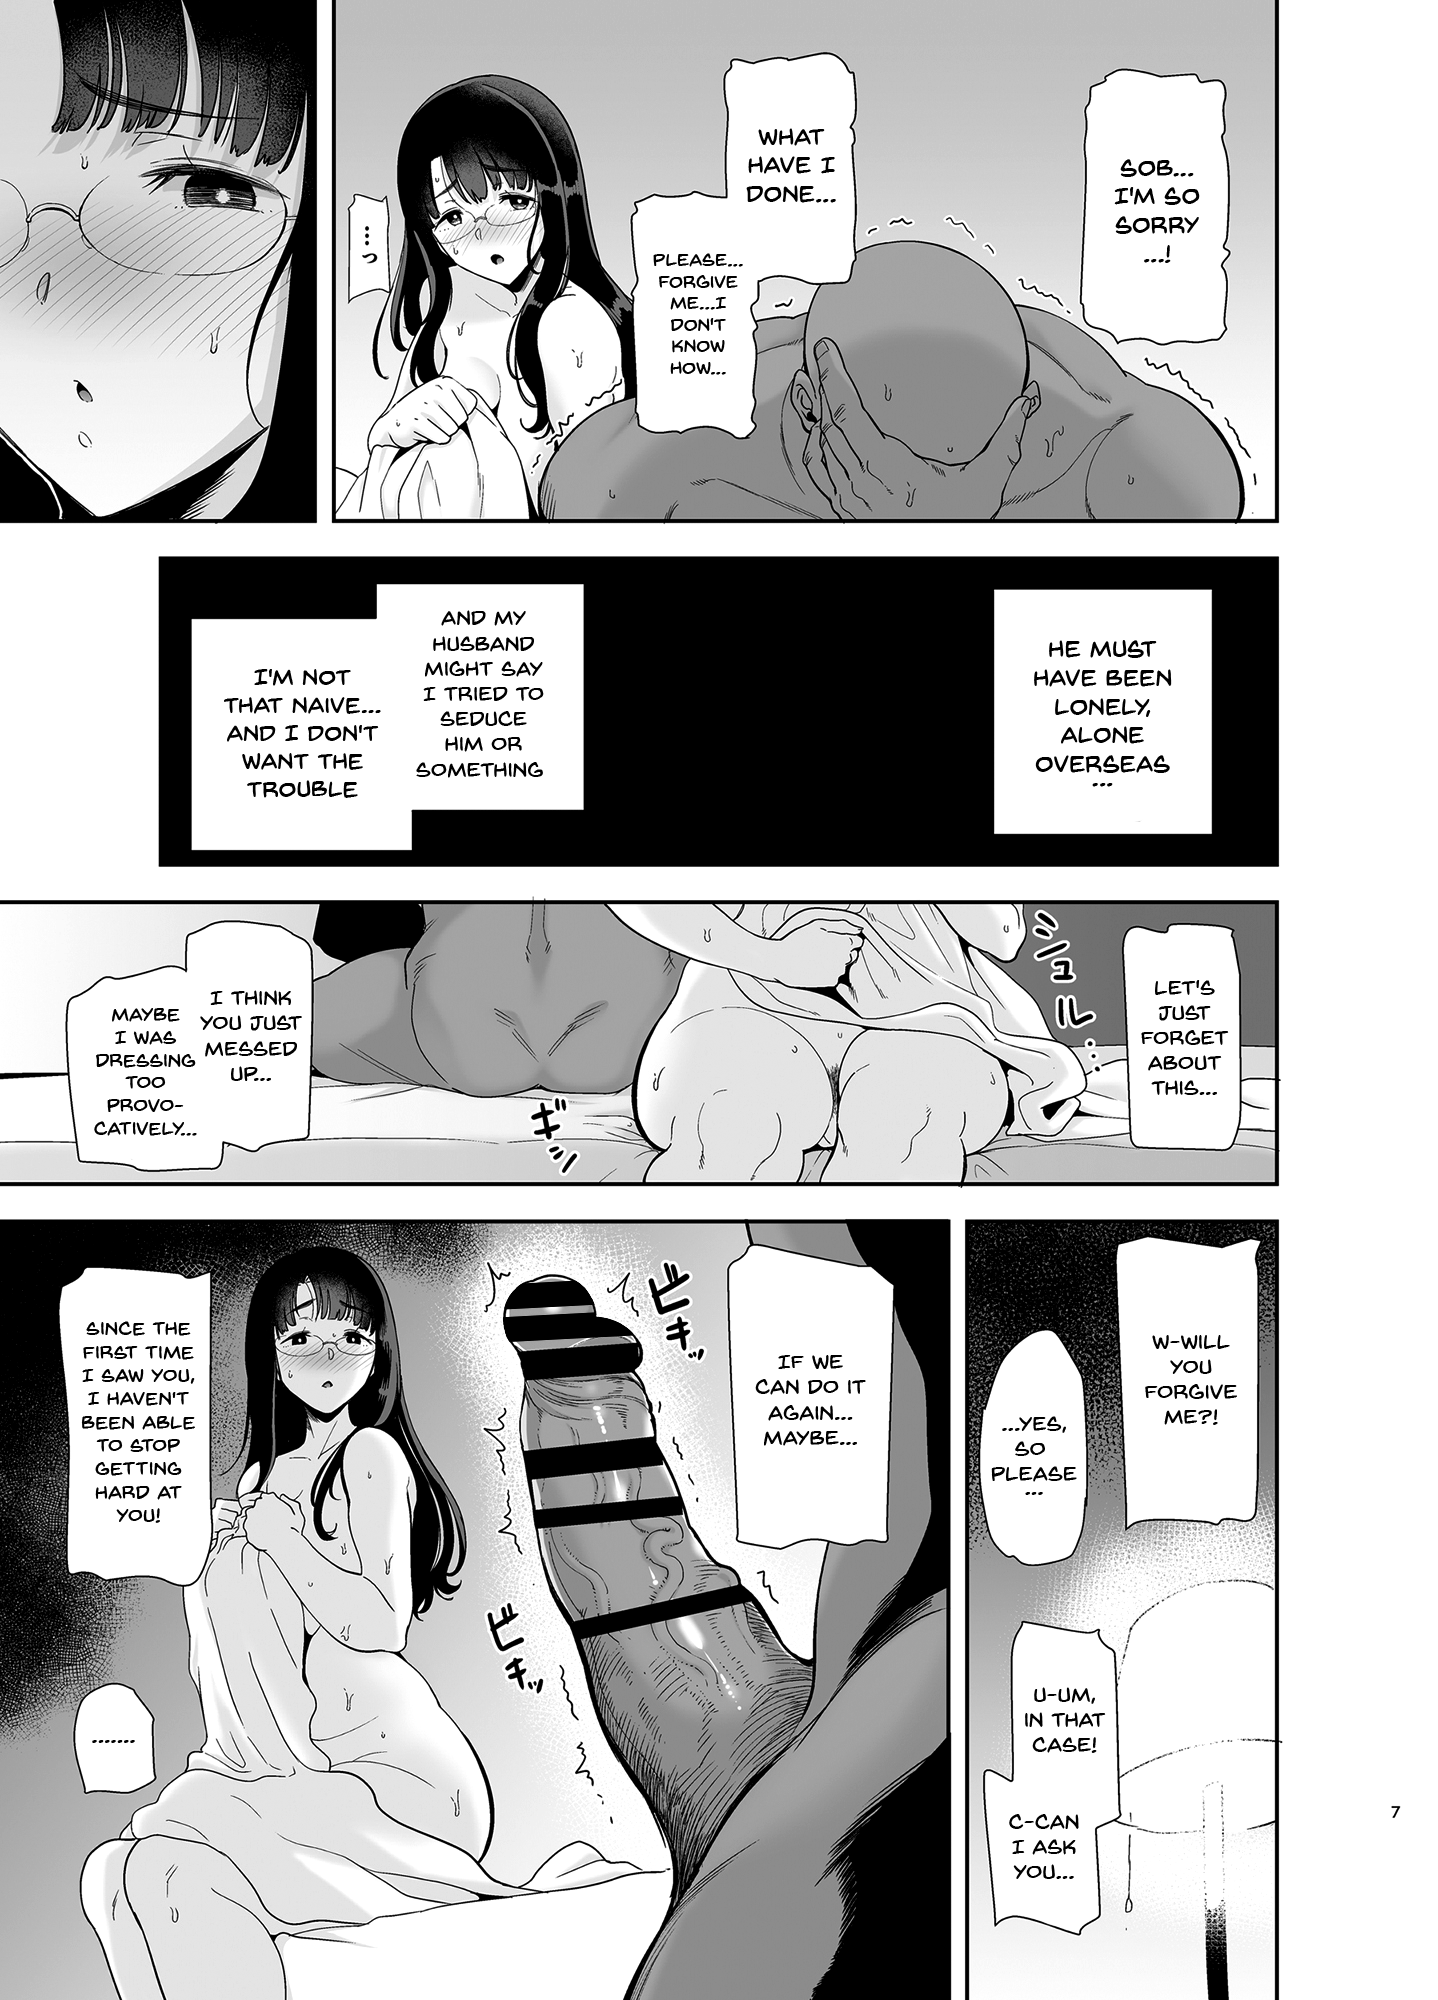 Wild Method 1 - Busty manga housewife is fucked by horny black student - NTR comics picture image